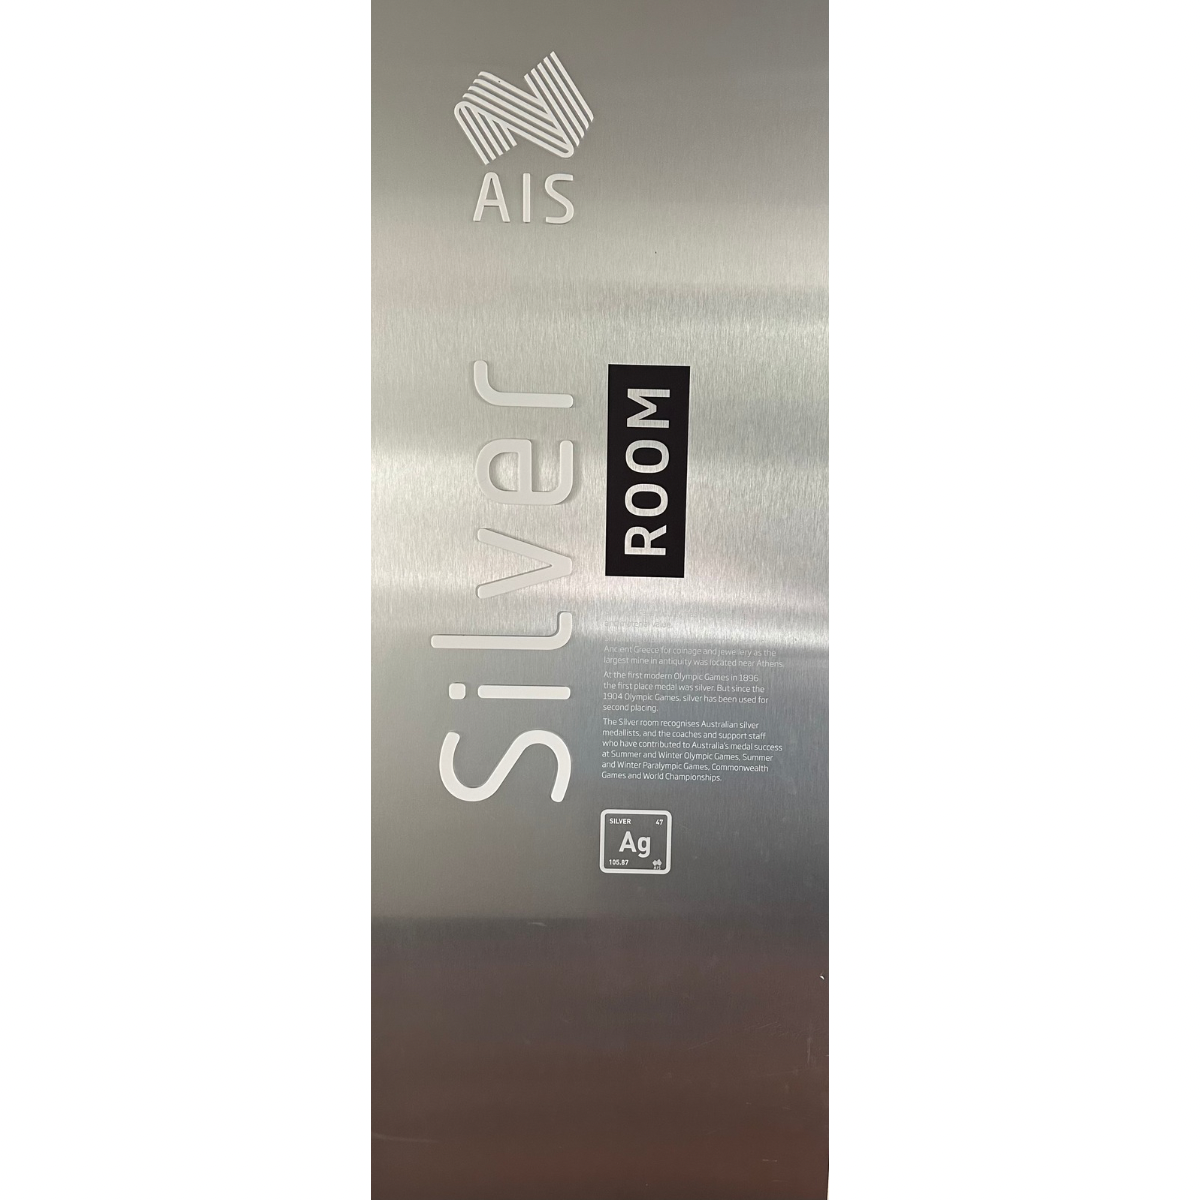 The image shows a sleek, metallic door sign reading "Silver Room" with a large "AIS" logo above it. Below the room name, there's a detailed description explaining the significance of silver in relation to the room, presumably referring to its attributes or the theme it represents. To the lower right corner of the sign, there is a chemical symbol for silver, "Ag," adding a scientific element to the aesthetic.